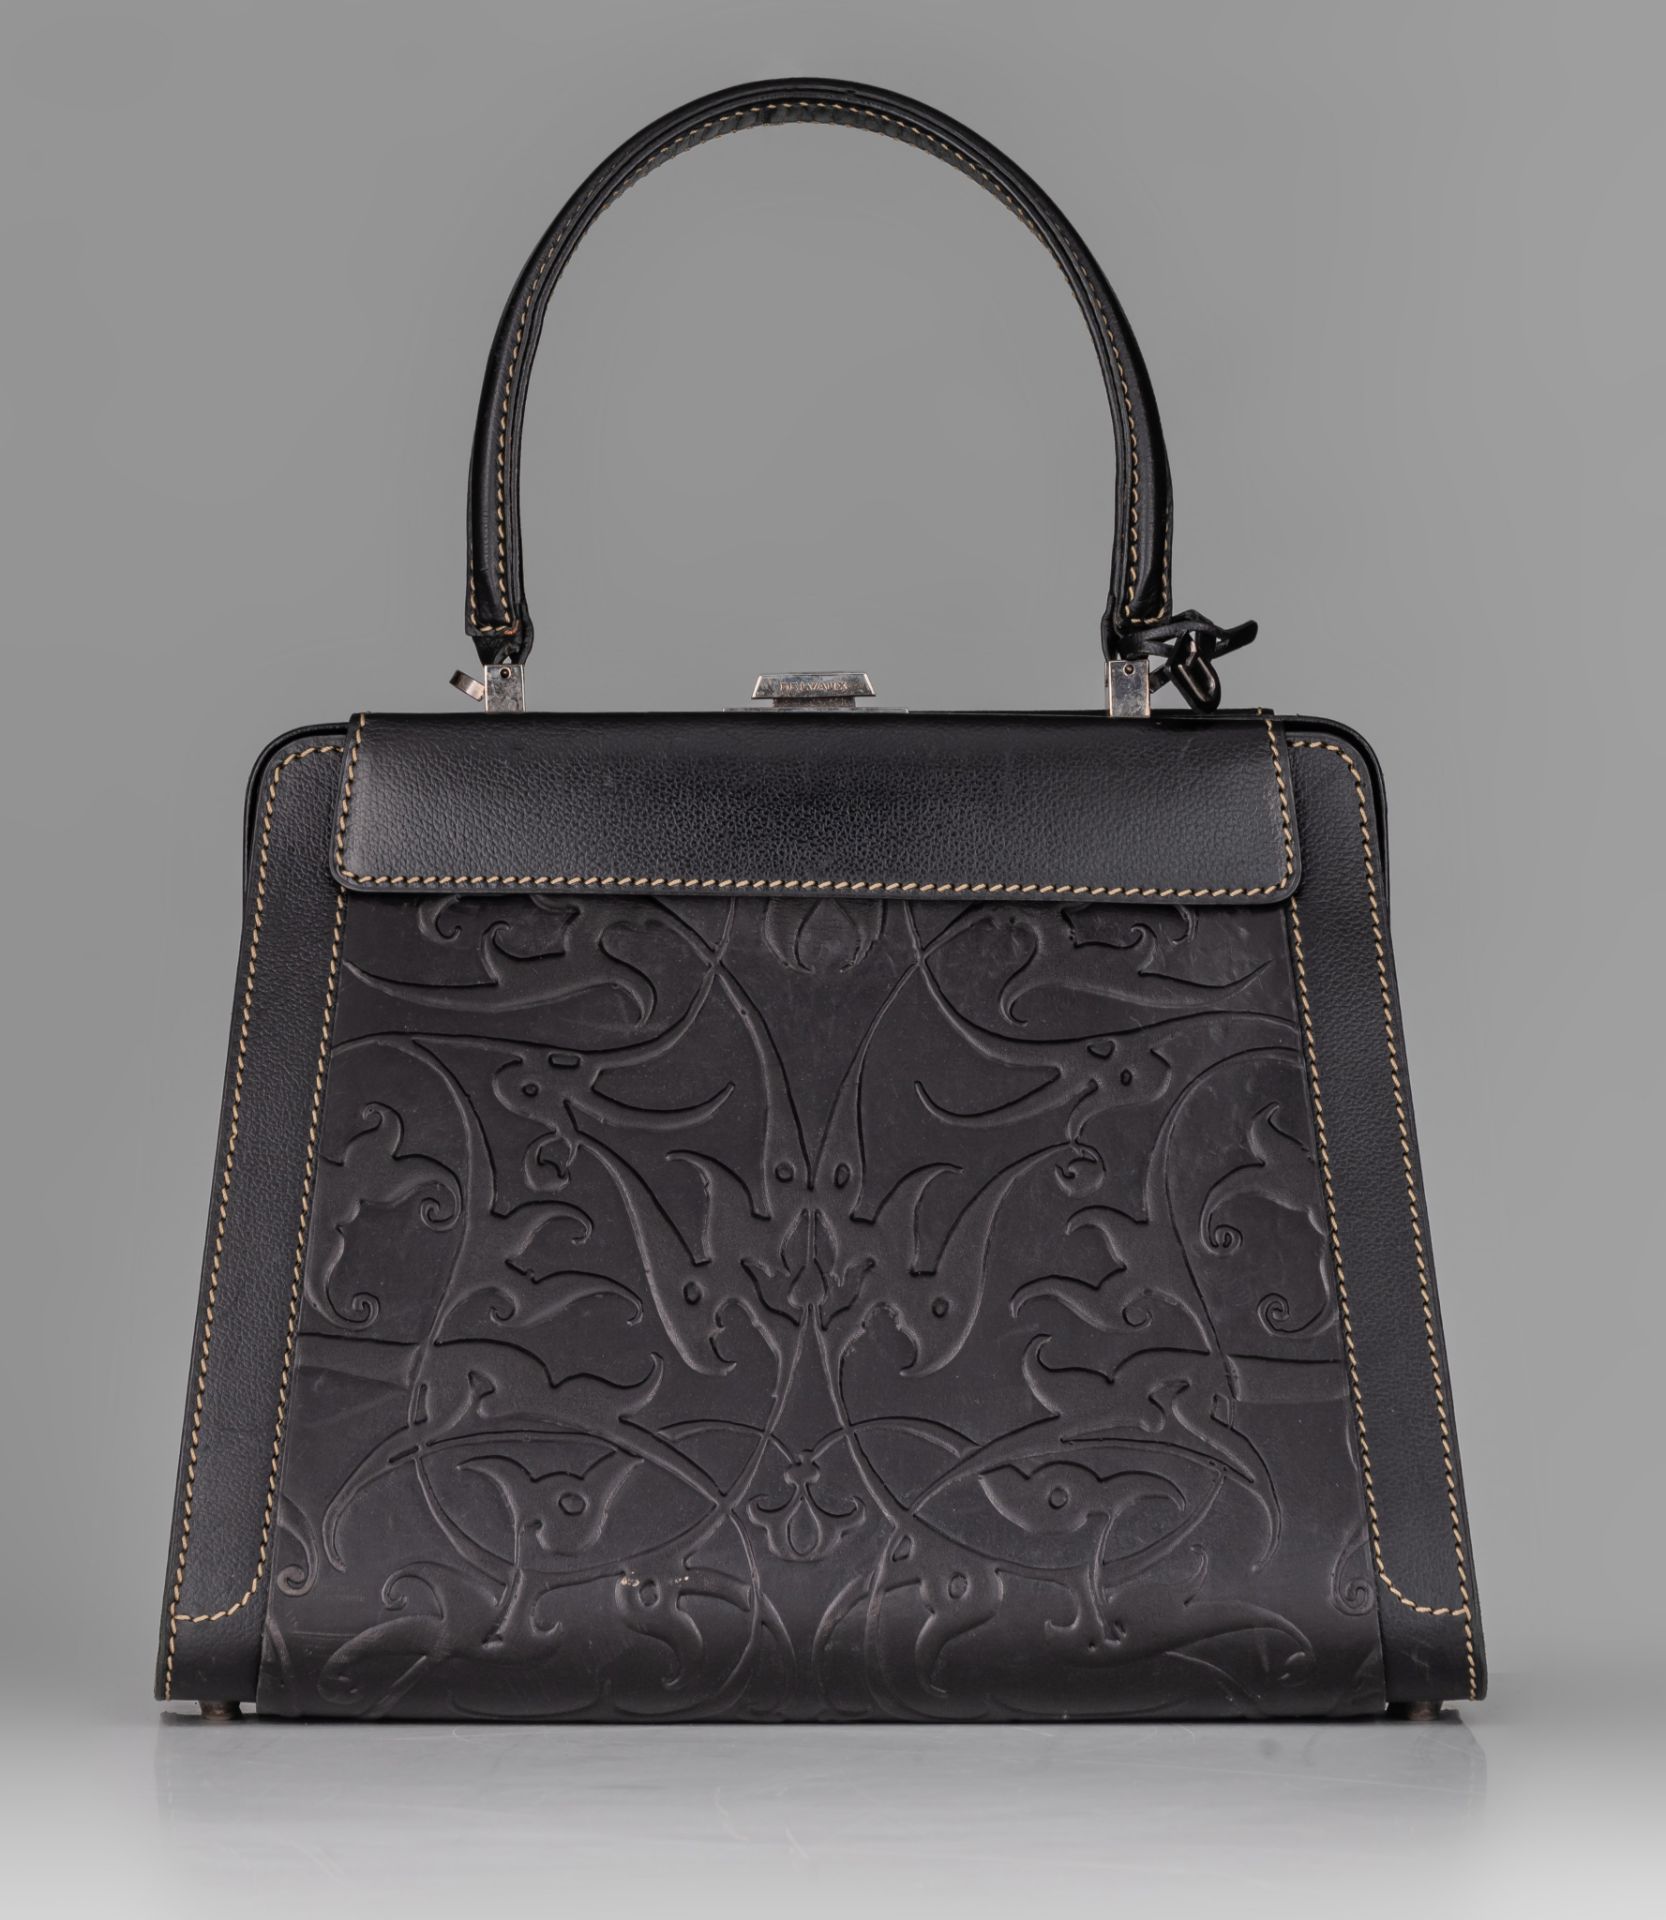 A Delvaux 'Jumping Illusion' handbag in black leather, with adjustable covers - Image 4 of 15